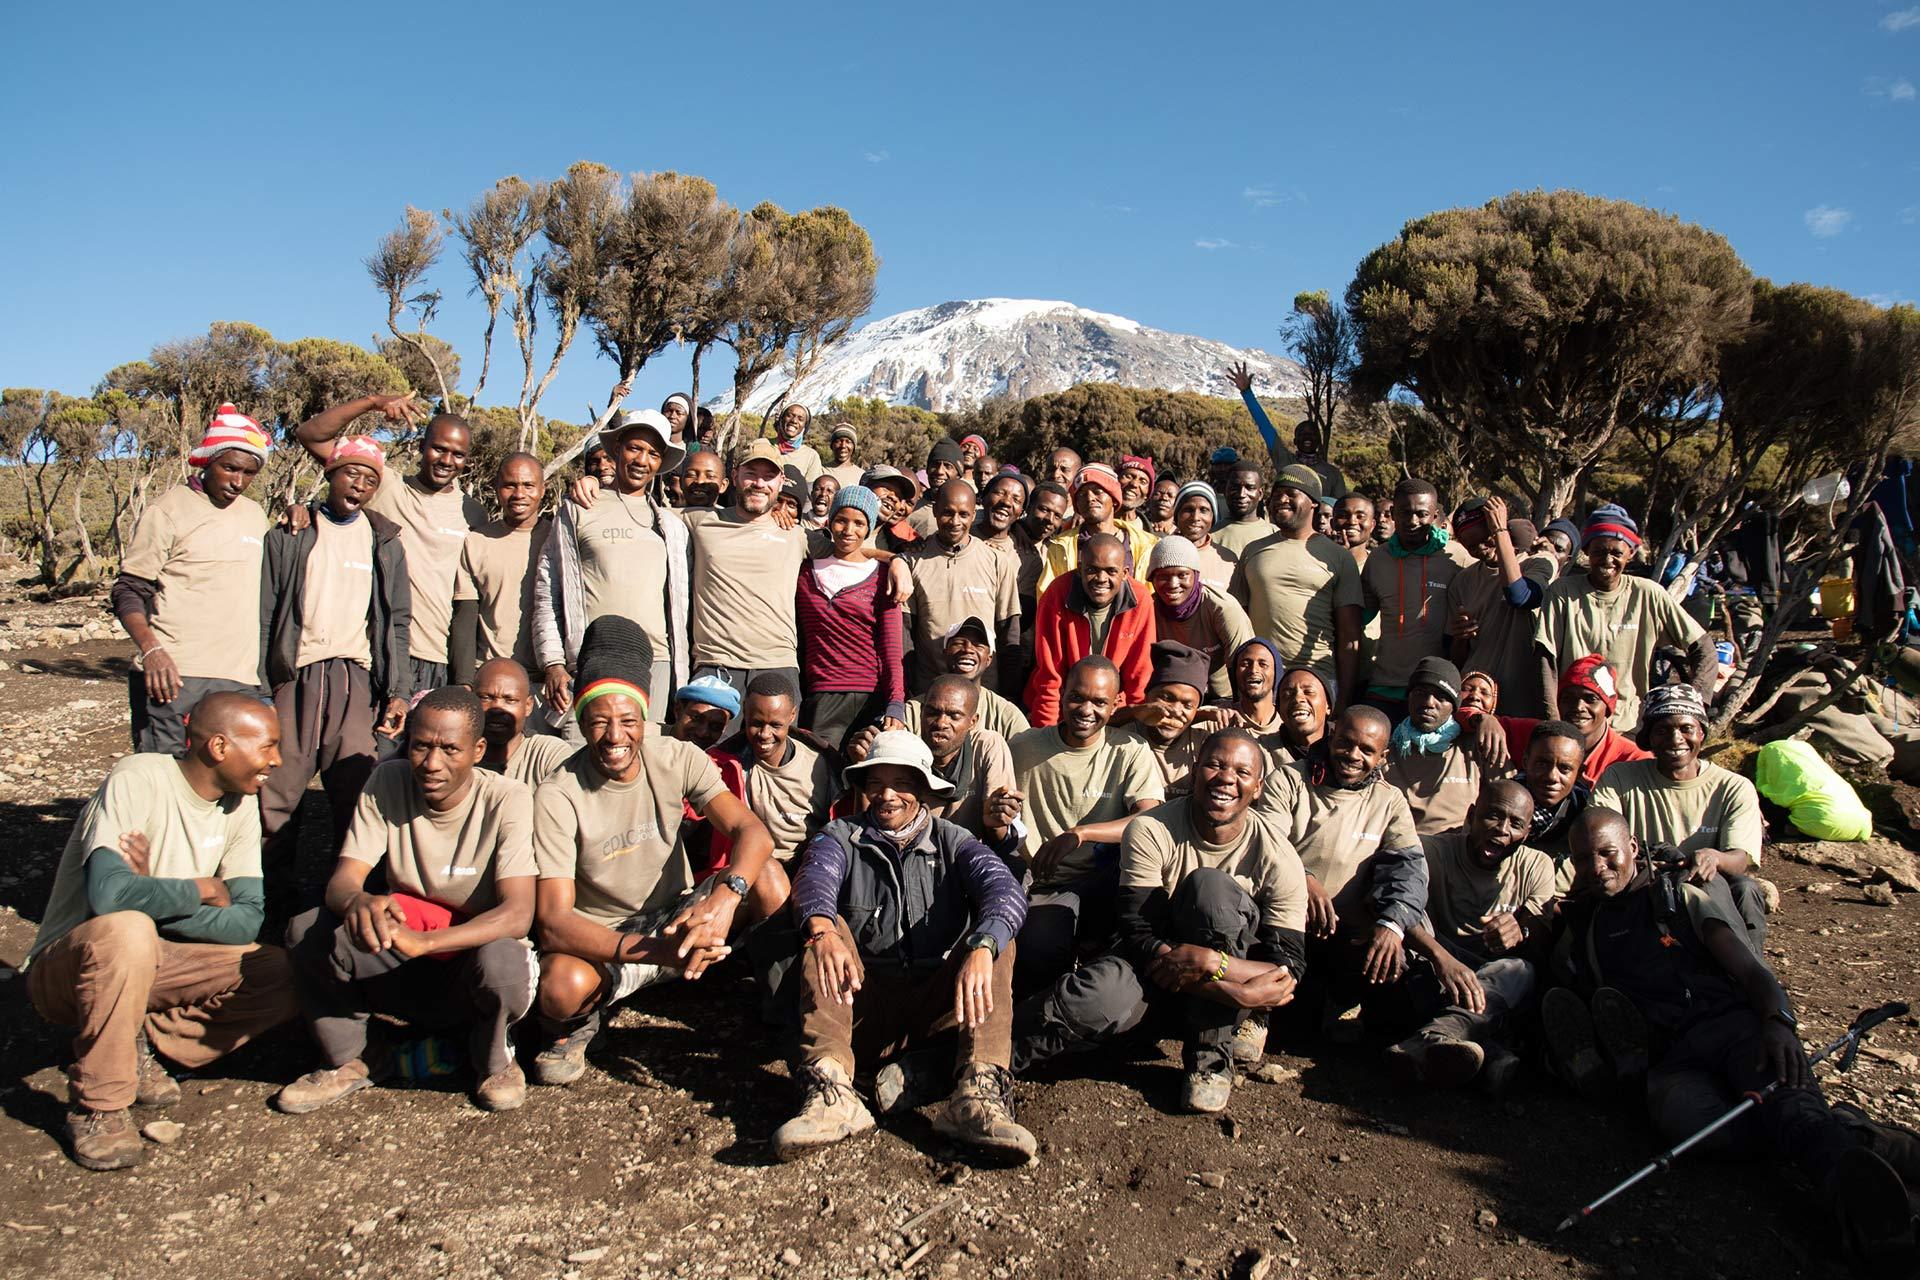 Group photo of the team of Summits Africa who will take you to reach the Roof of Africa.